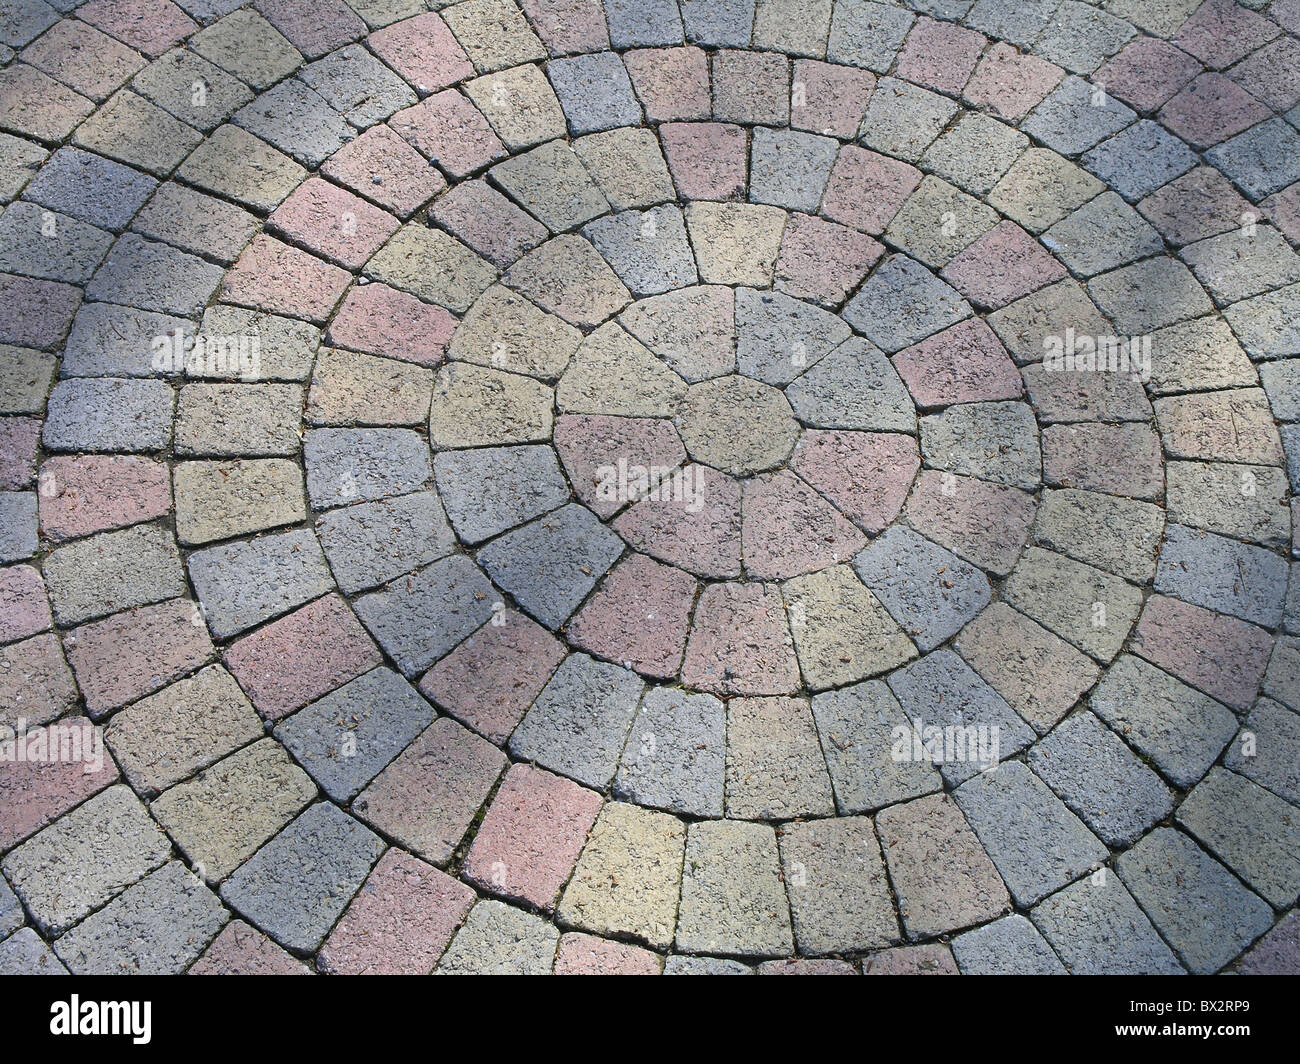 circles cobblestones Concentrical round pavement Paving stones place rings stones structure Stock Photo